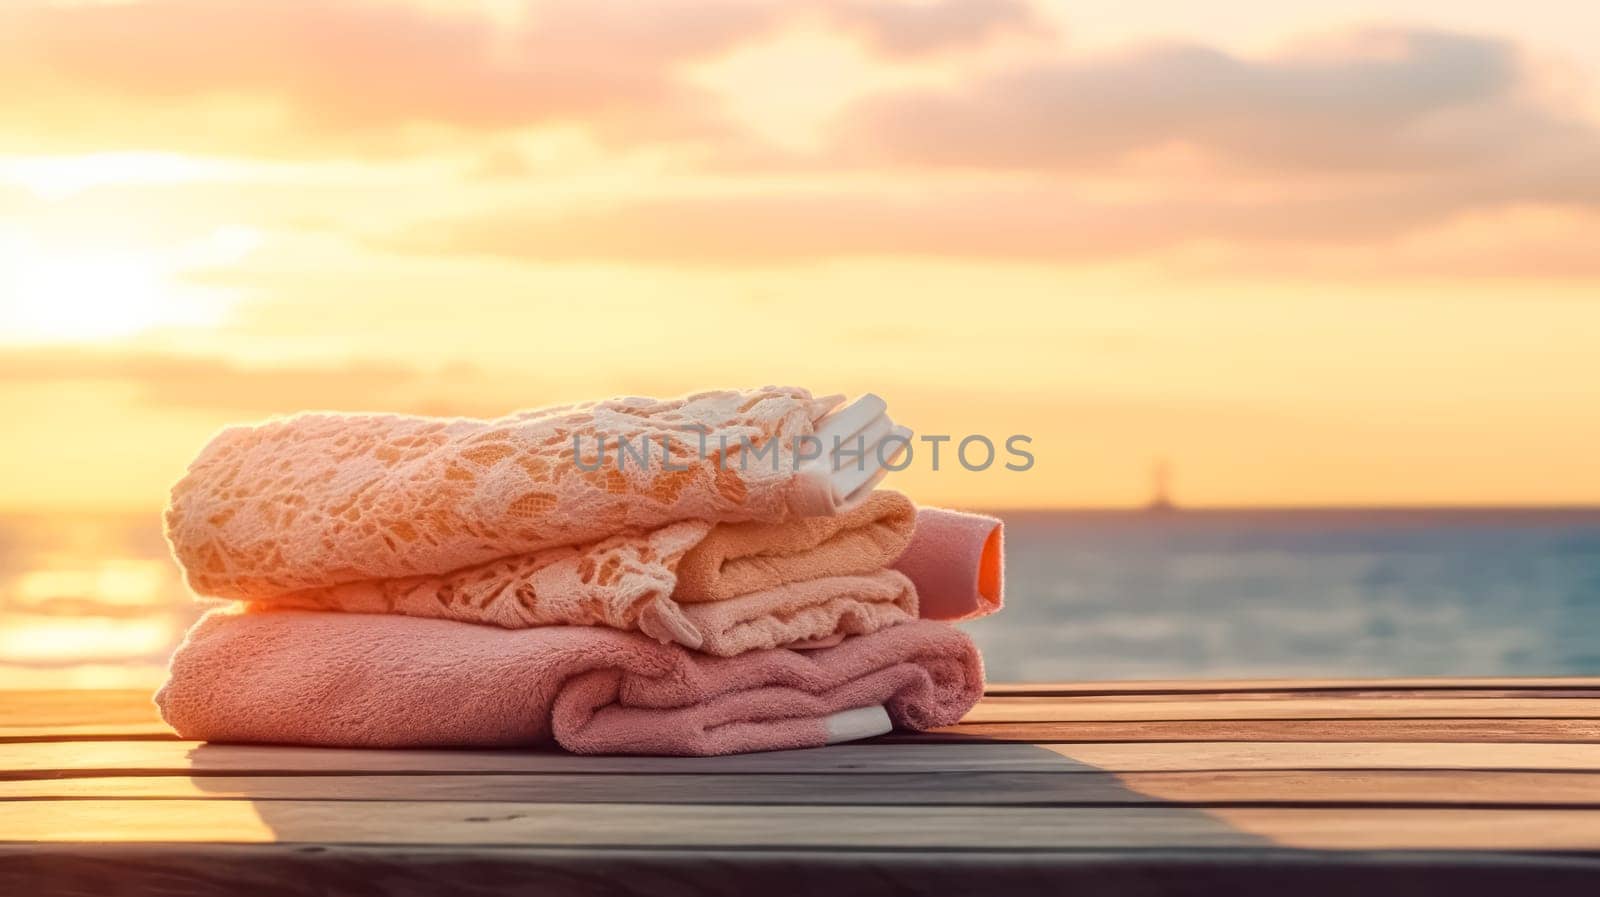 Indulge in relaxation with a serene spa and care concept. A stack of towels rests on a table against the backdrop of a beach sunset, creating a tranquil ambiance.